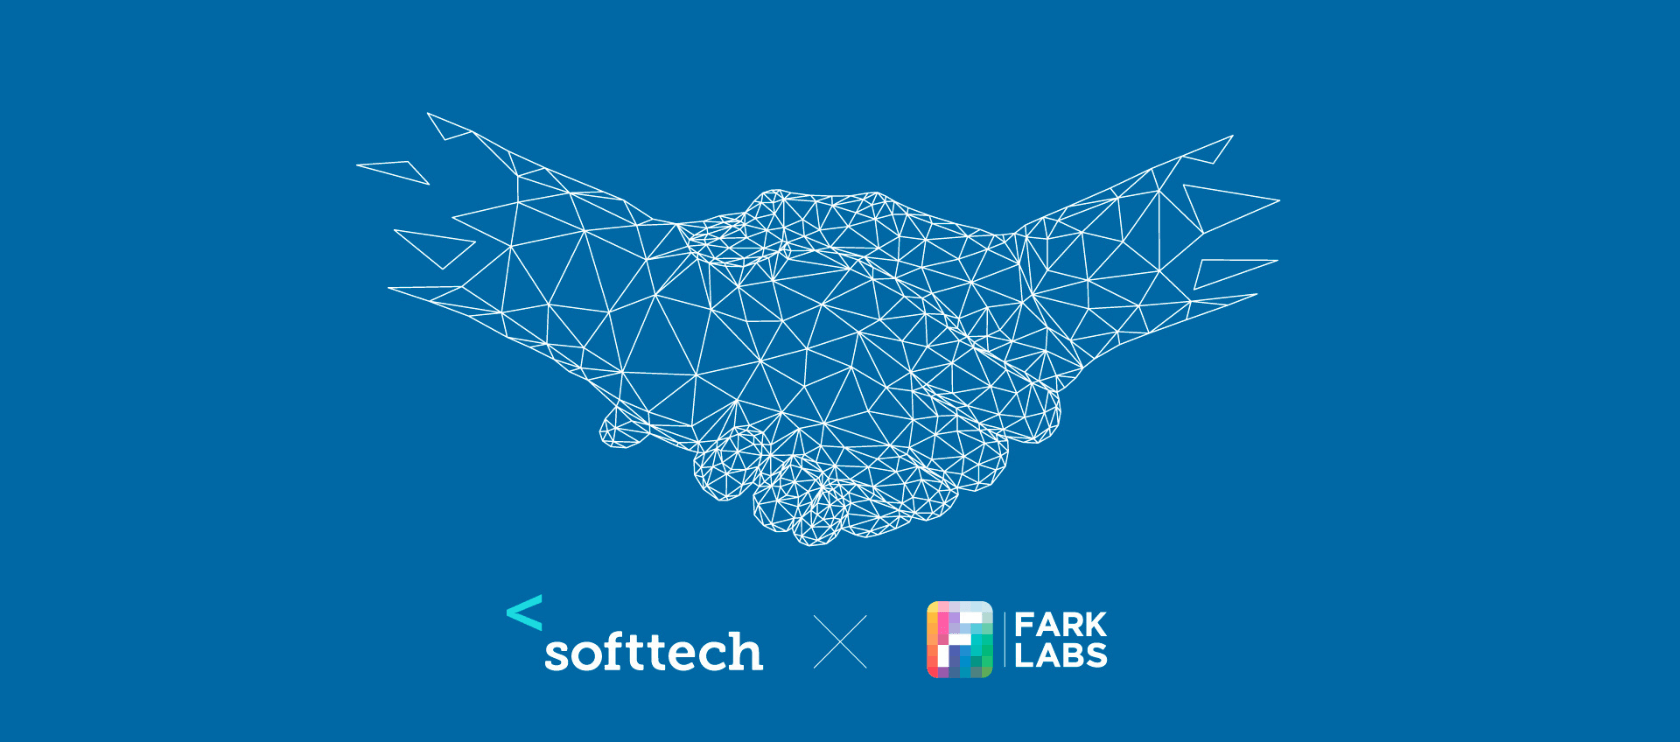 Softtech and Fark Labs forms a partnership and launches an AI Accelerator Program